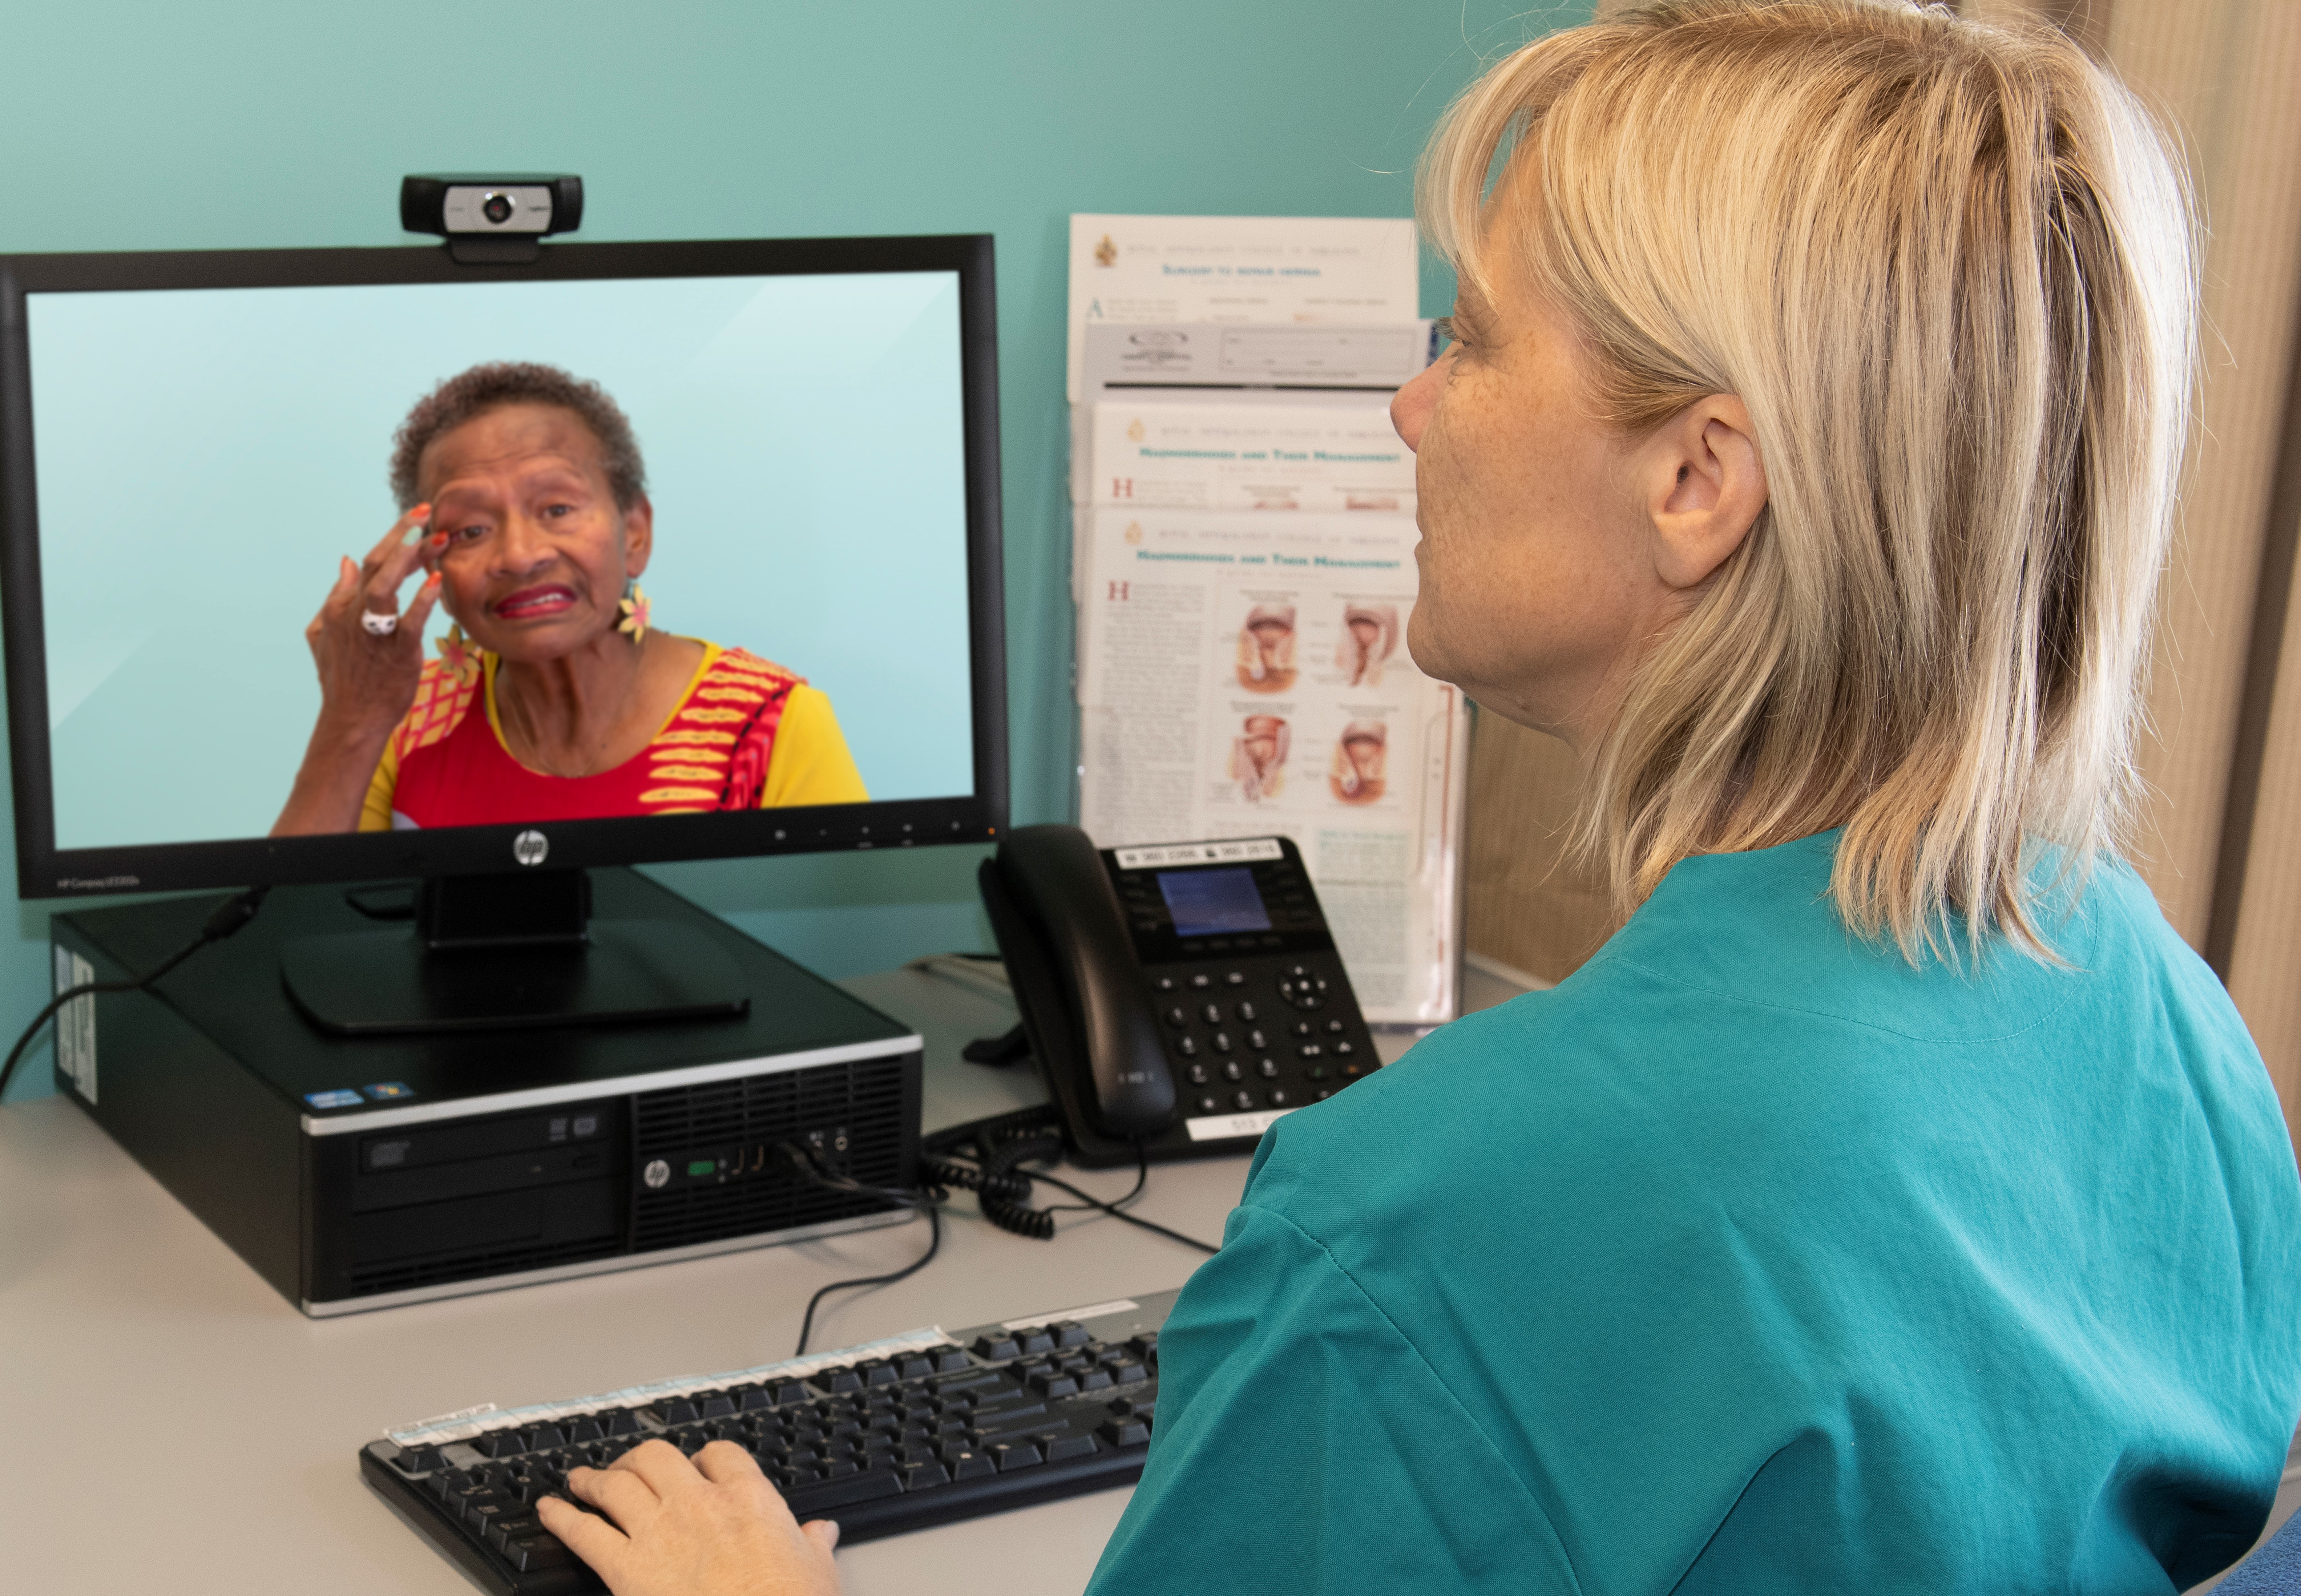  In a first for New Zealand, undergraduate students will now be able to undertake telehealth clinical placements.